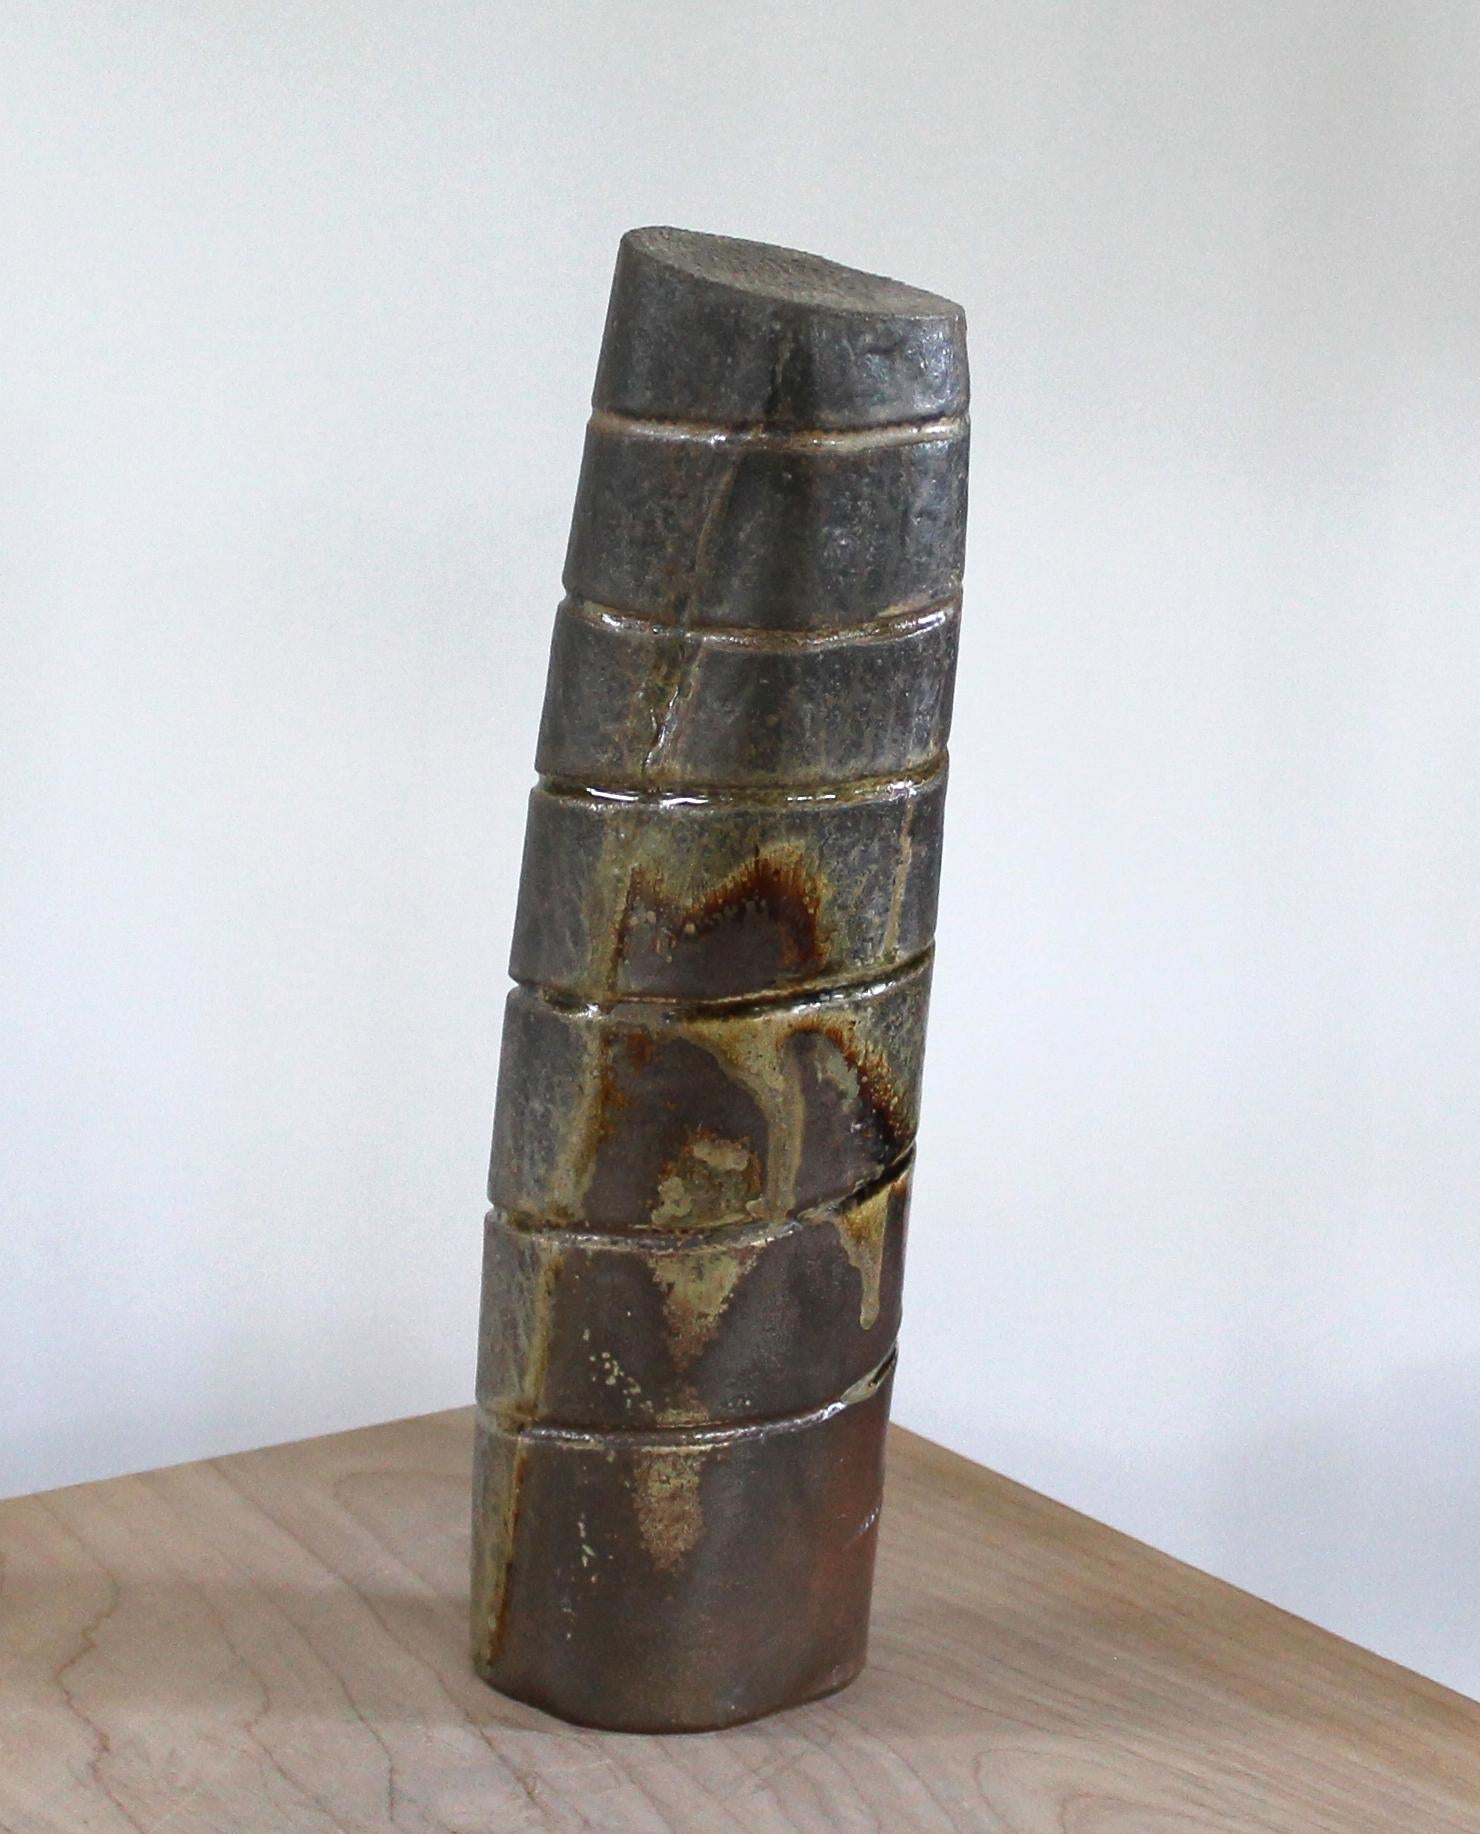 "VERTICAL 7", sculpture, clay, ceramic, abstract, tribal, pattern, tower, column - Mixed Media Art by Harold Wortsman